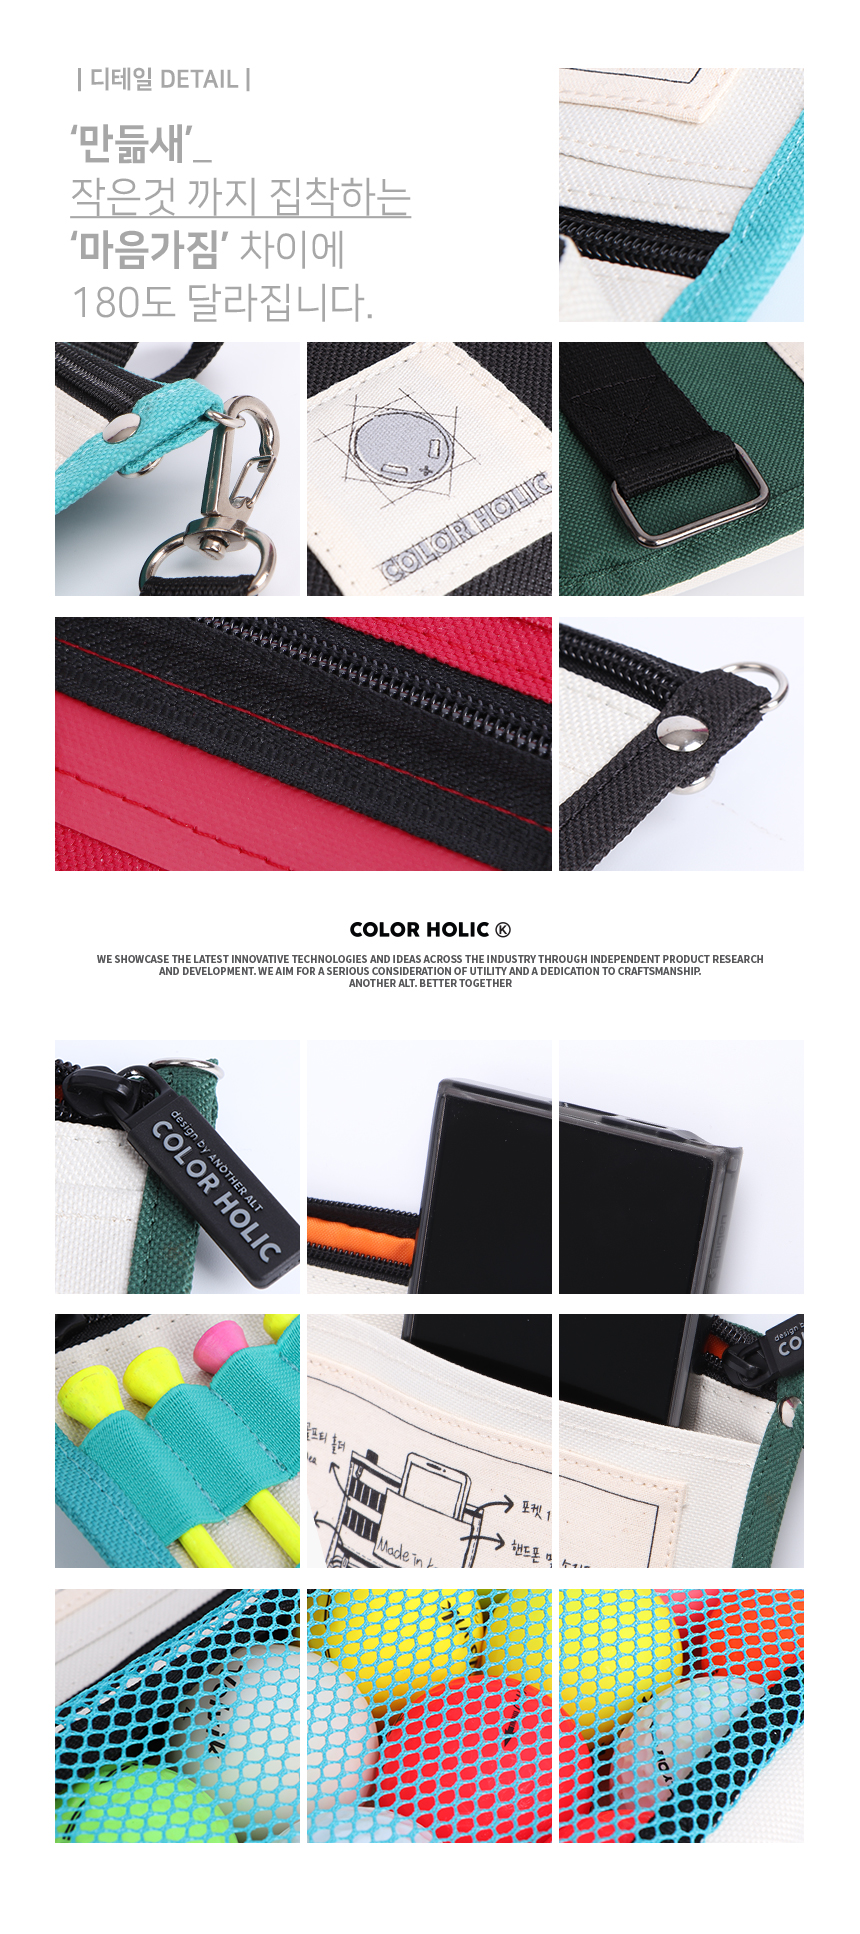 colorholic_golfcart_organizer_pouch_rok_07_page_title_story_box.jpg